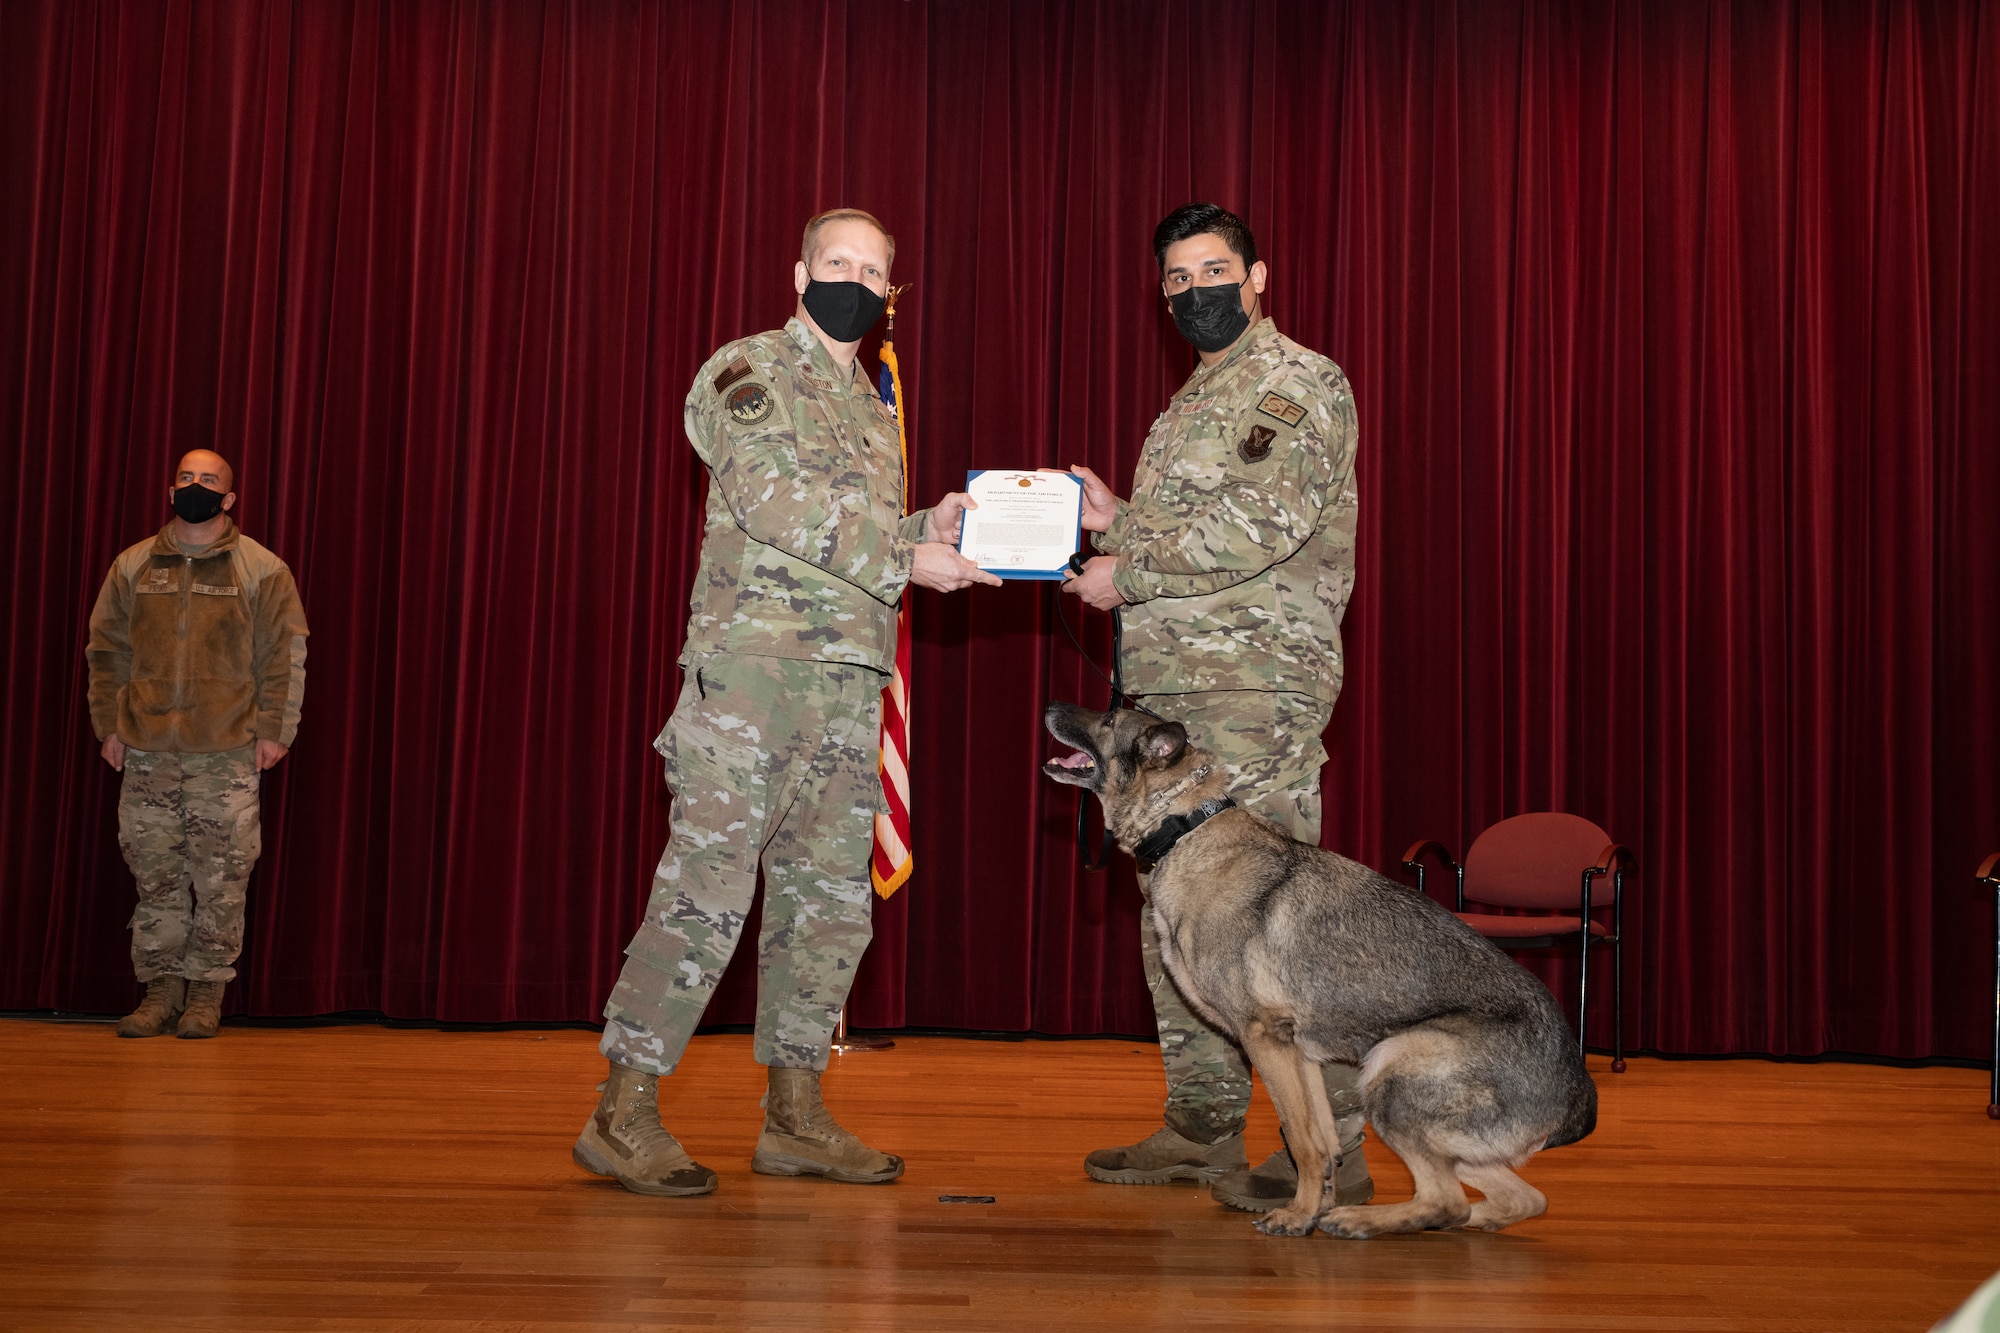 U.S. Air Force Lt. Col. Sproston, 509th Security Forces Squadron Commander, presents U.S. Air Force Staff Sgt. Alex Villalpando, 509th Security Forces military working dog handler, with U.S. Air Force MWD Stiffler's Meritorious Service Medal certificate during Stiffler's retirement ceremony at the base theater on Whiteman Air Force Base Feb. 4, 2022. Military working dogs provide a valuable force multiplier to aid in the security and readiness within our units. (U.S. Air Force photo by Airman 1st Class Bryson Britt)